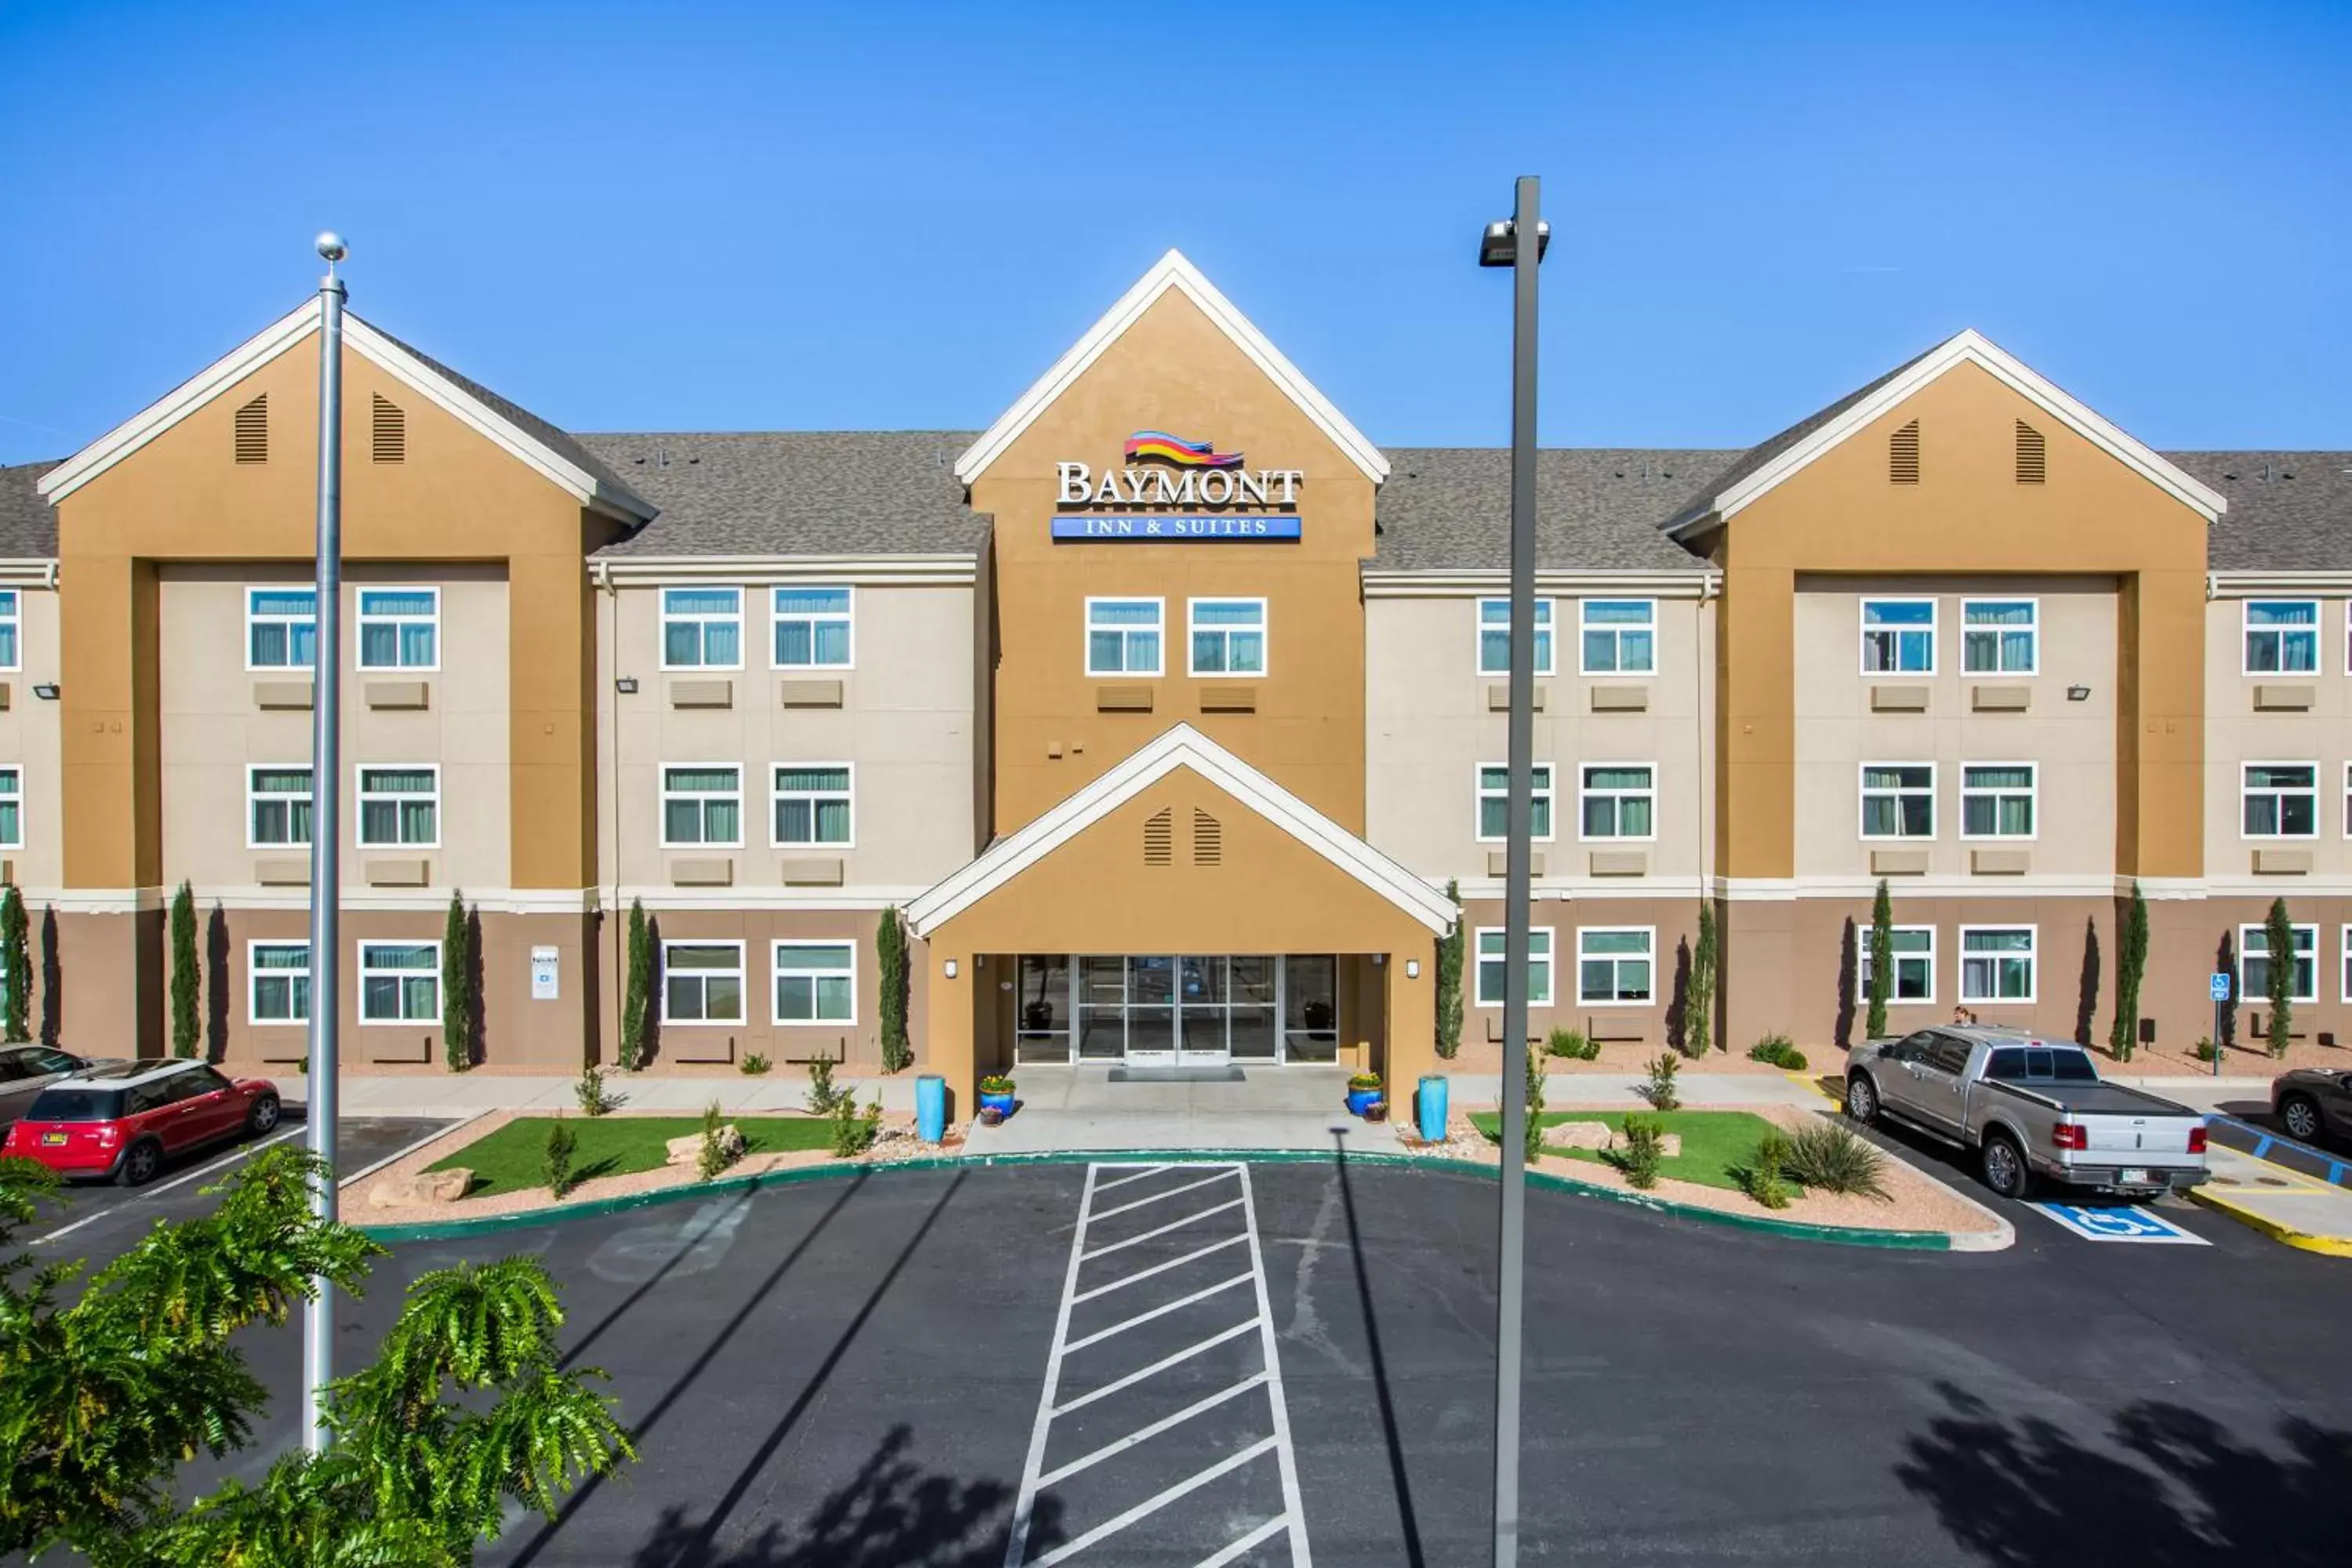 Property building in Baymont by Wyndham Albuquerque Airport